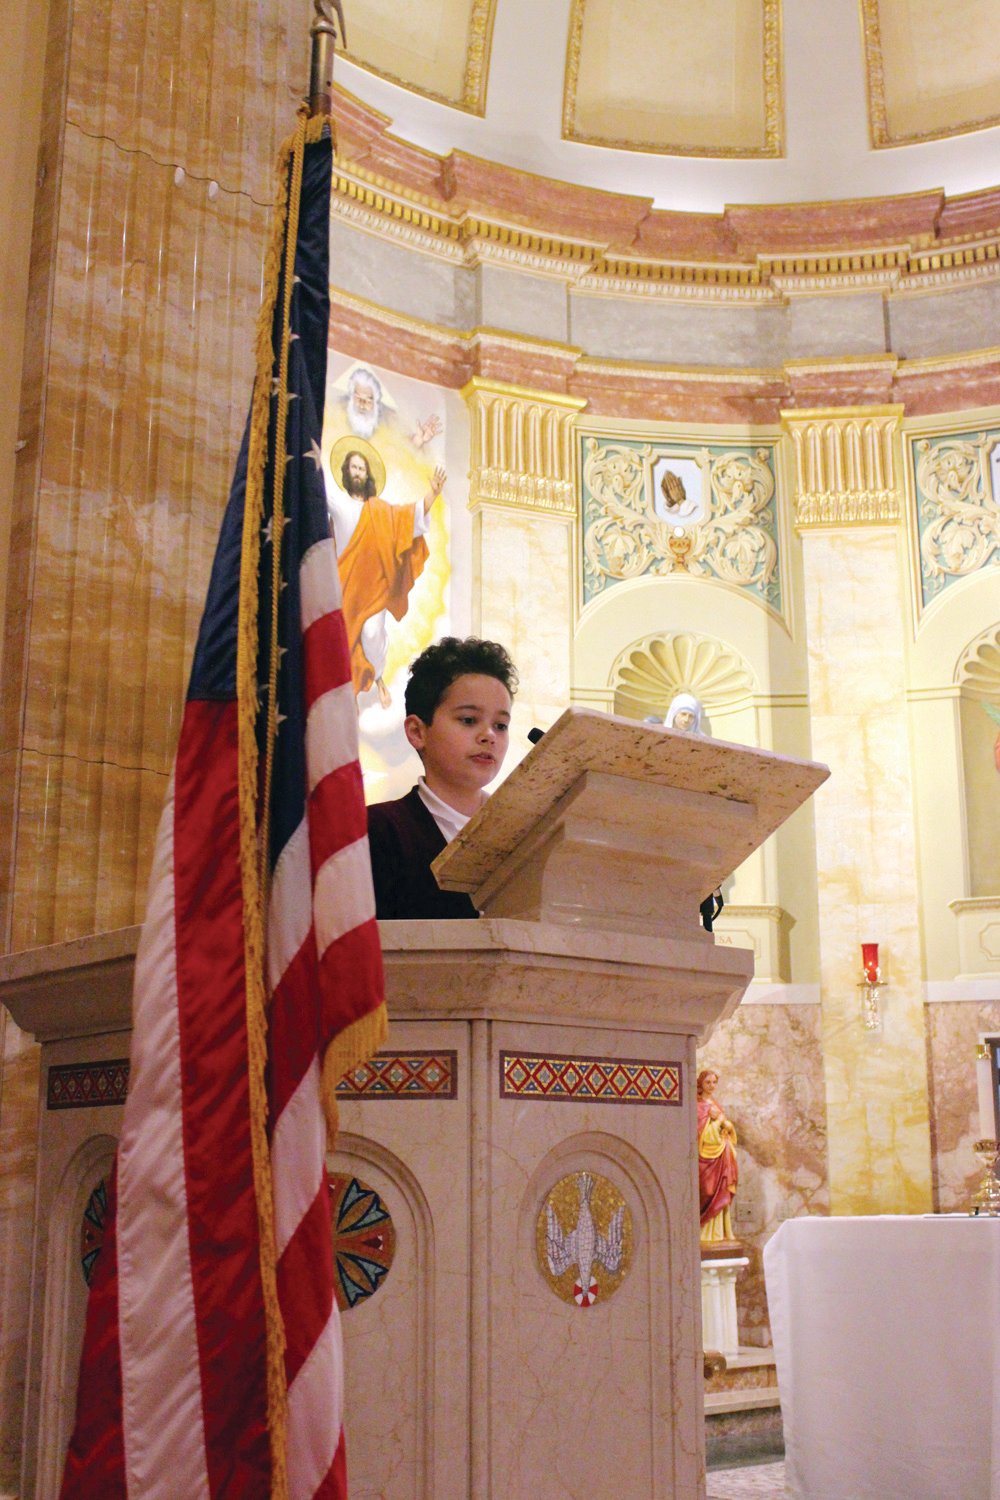 PATRIOTIC PRAYERS: St. Rocco School held its Veterans Day Prayer Service Wednesday, Nov. 9 at St. Rocco Church, 931 Atwood Ave., Johnston. Students from St. Rocco School read poems that they wrote, carried photos of loved ones, sang patriotic songs and prayed for all veterans.  Also, the school held a “Dress Down Day” for "Operation Christmas Stocking" where students dressed in red, white and blue, along with donating a dollar for the cause. Proceeds will go toward filling stockings for soldiers in the 43rd MP Brigade.